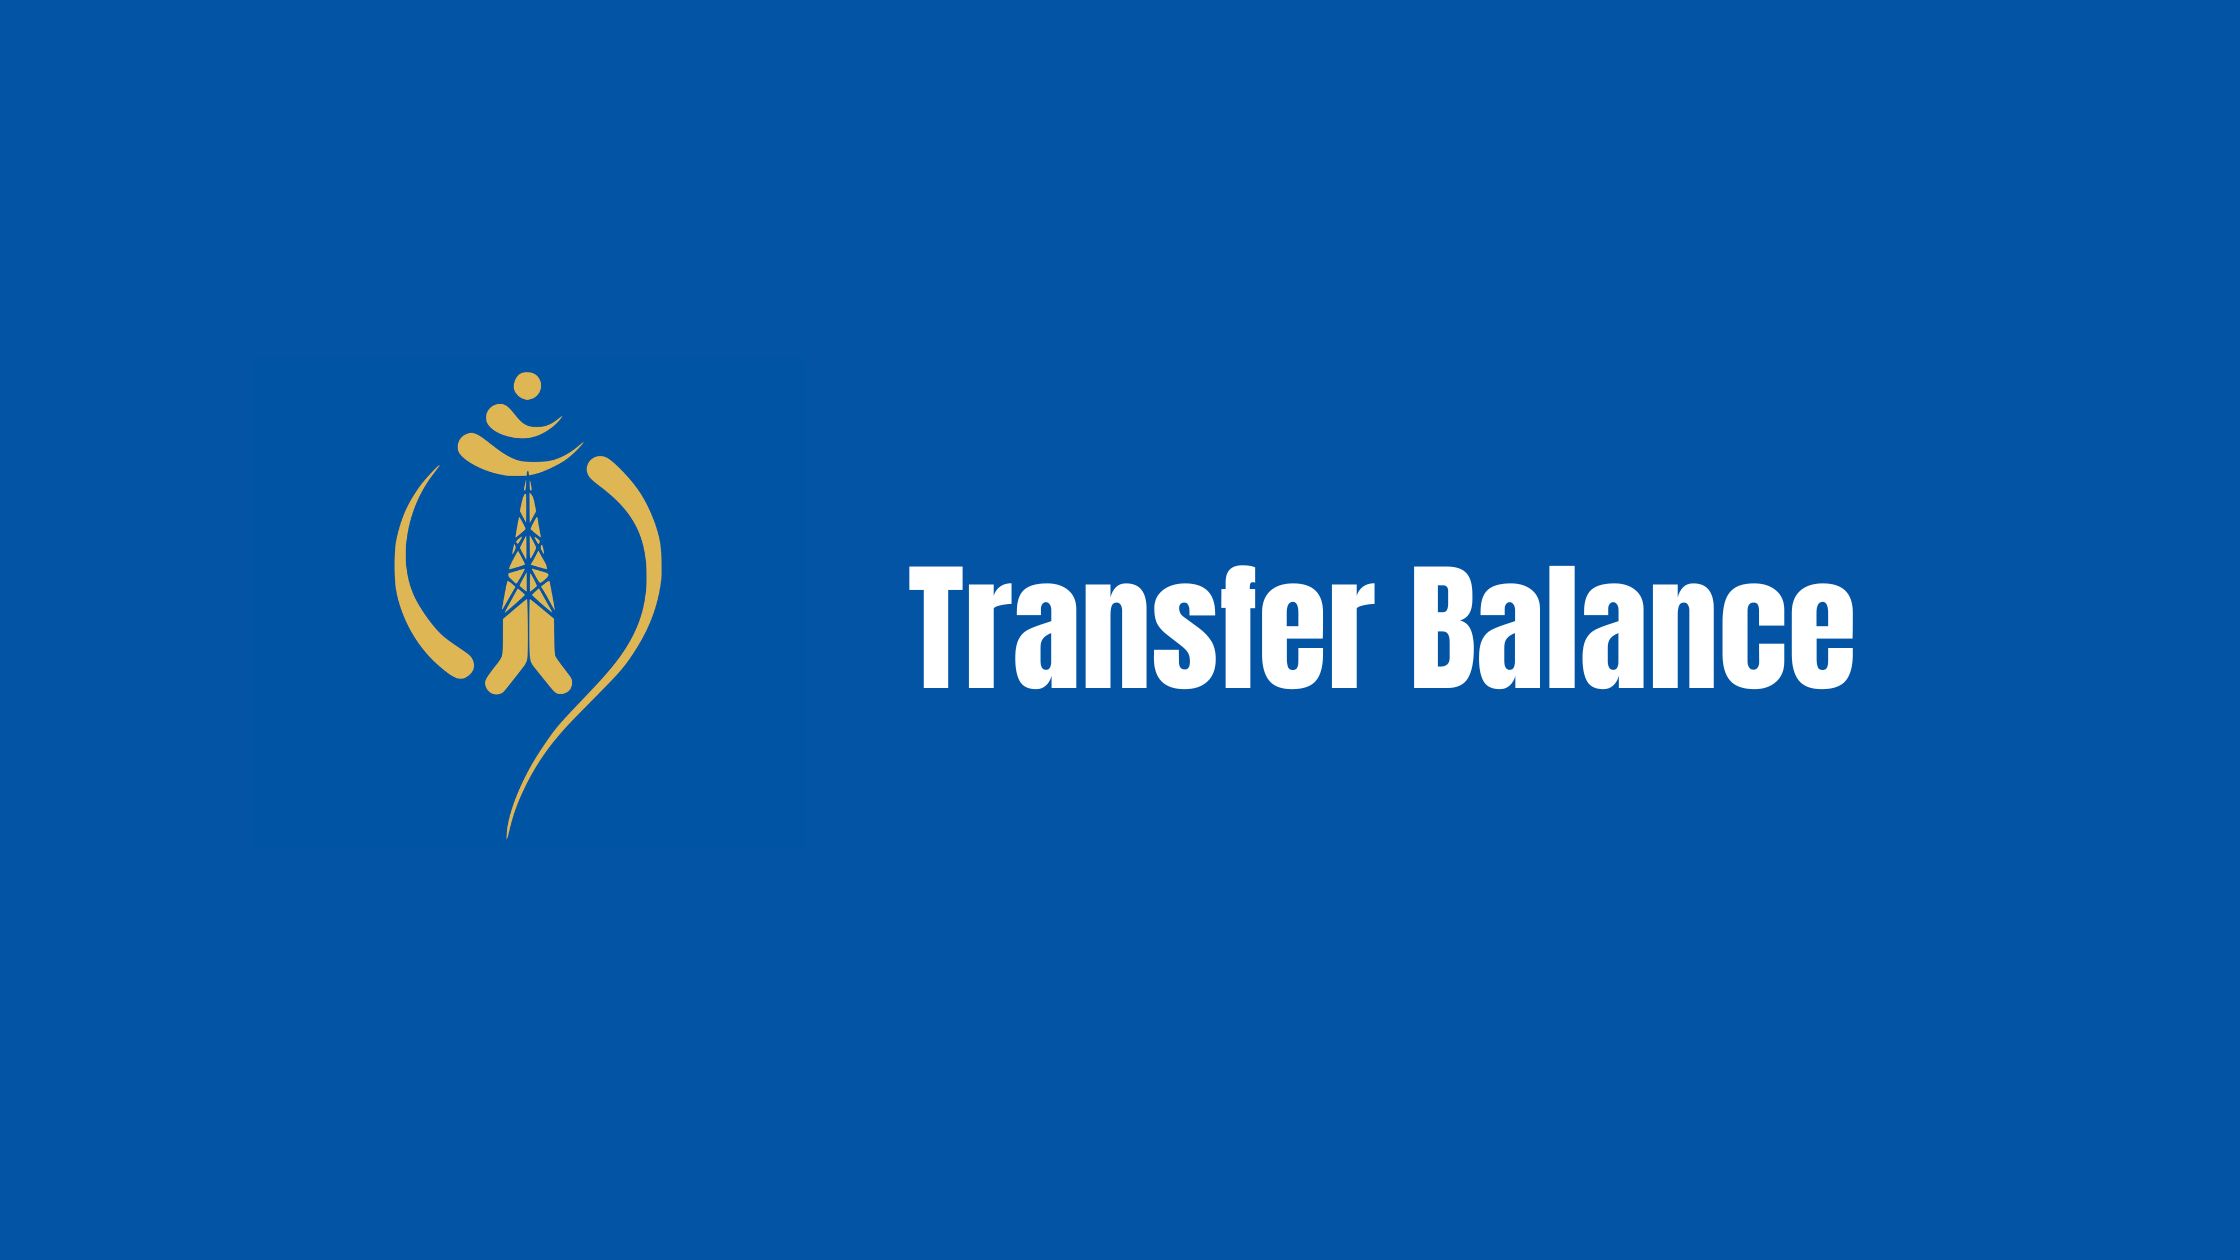 How To Transfer Balance In Ntc For Prepaid & Postpaid